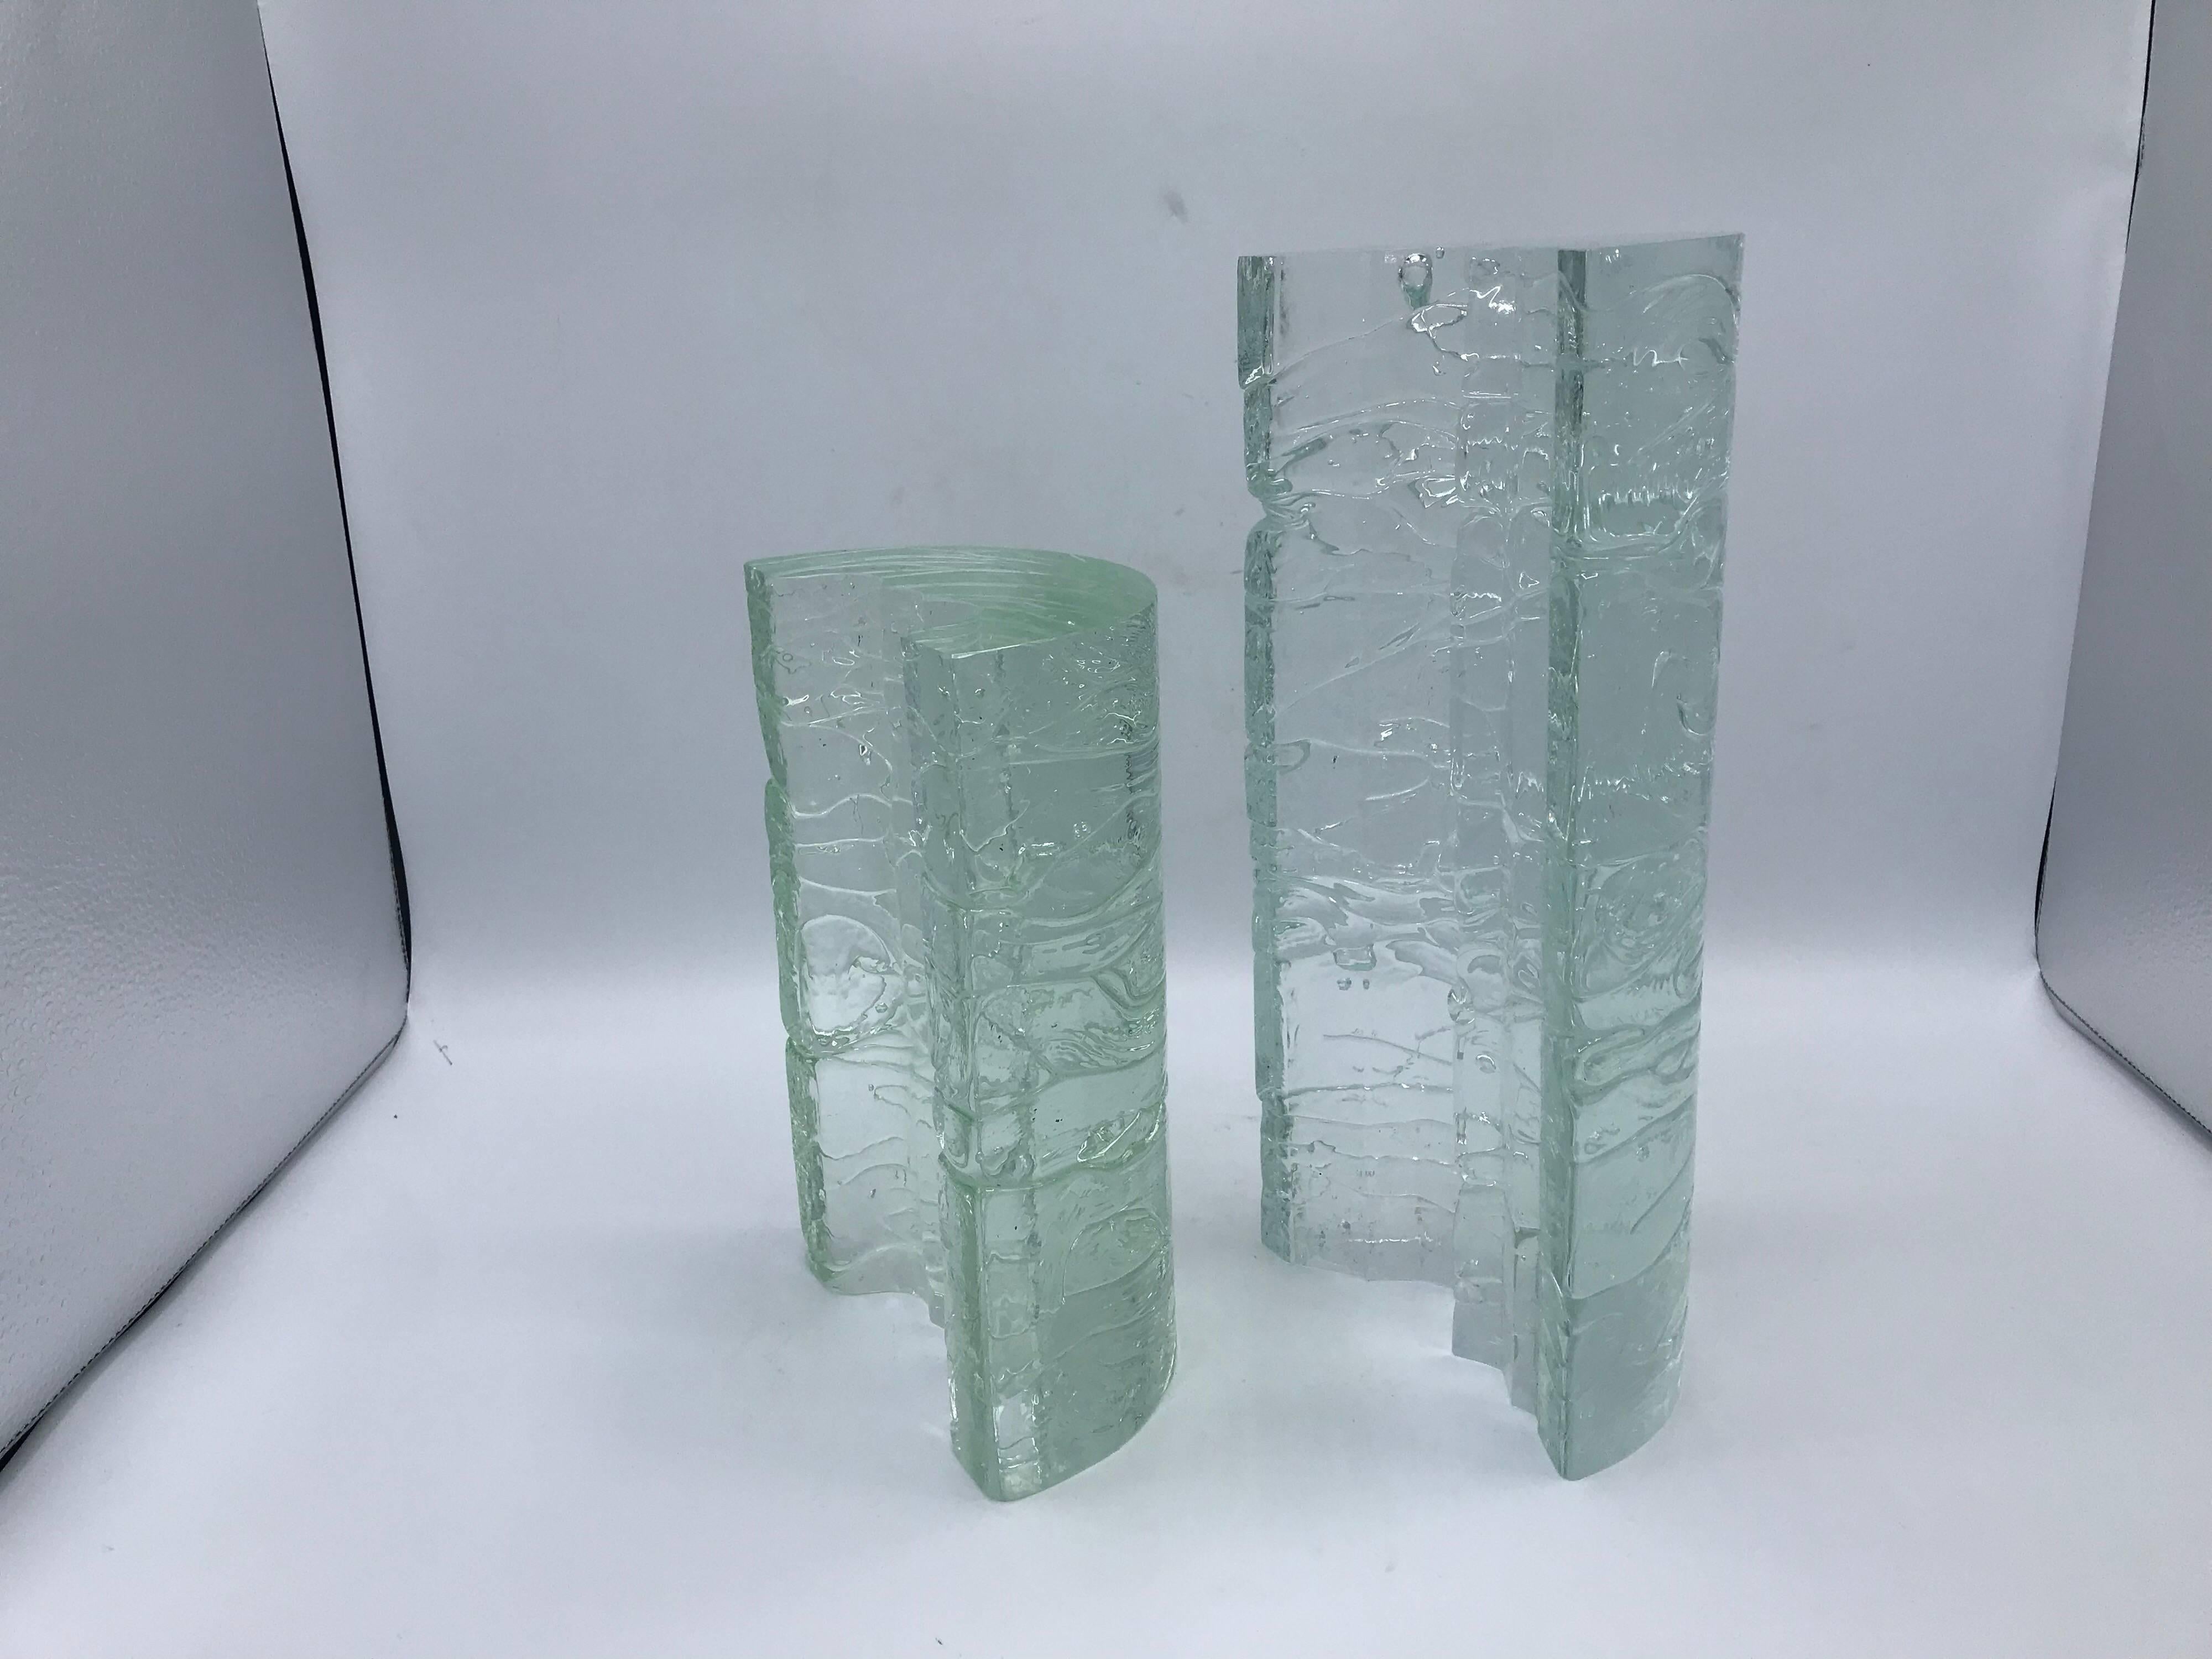 Listed is a stunning, pair of 1960s Frantisek Vizner for Skrdlovice solid-glass sculptures. A beautiful, crescent shaped crackled glass sculptures. Larger sculpture includes original tag on backside, see photo 4. Substantial sculptures that can